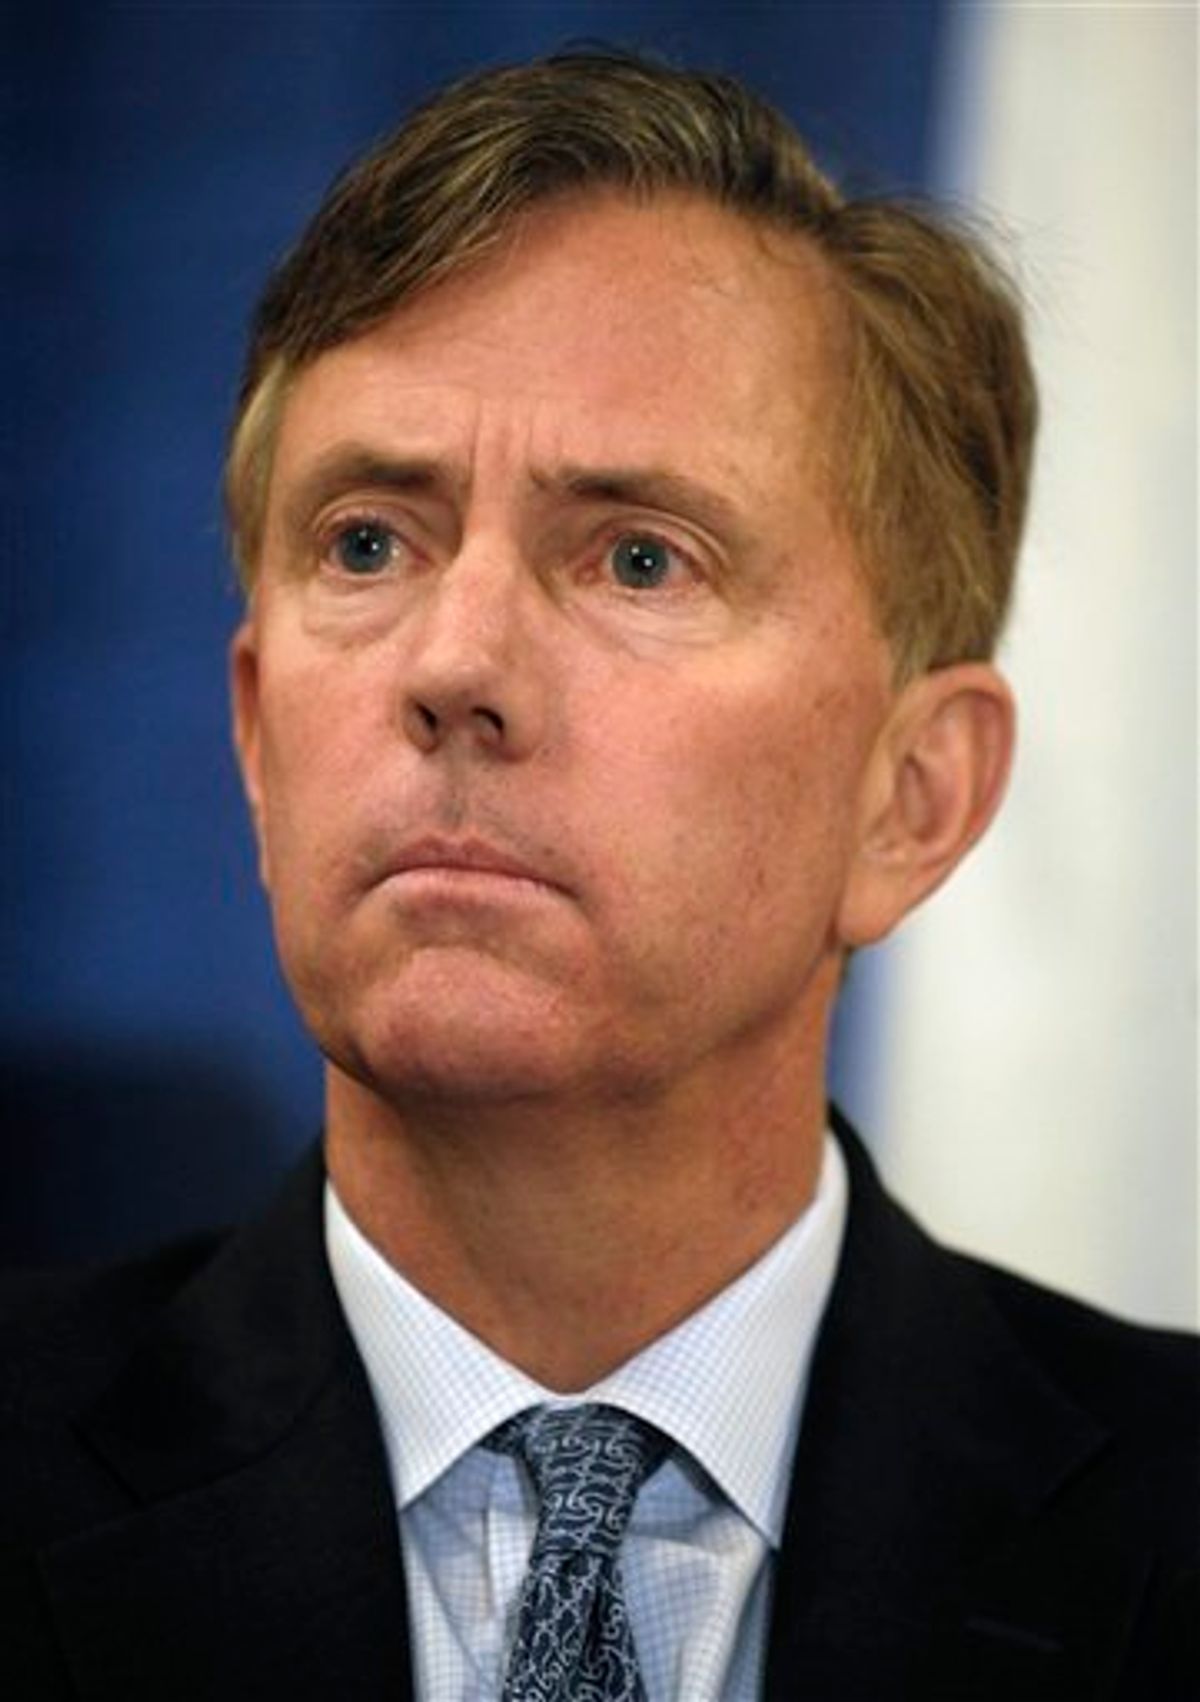 FILE - In this Jan. 20, 2010 file photo, Ned Lamont, listens to speakers at a bipartisan forum in Cromwell, Conn. Lamont, the political upstart who challenged U.S. Sen. Joe Lieberman four years ago, is expected to announce his bid for governor Tuesday, Feb. 16, 2010 at the Old State House in Hartford. (AP Photo/Jessica Hill, File) (AP)